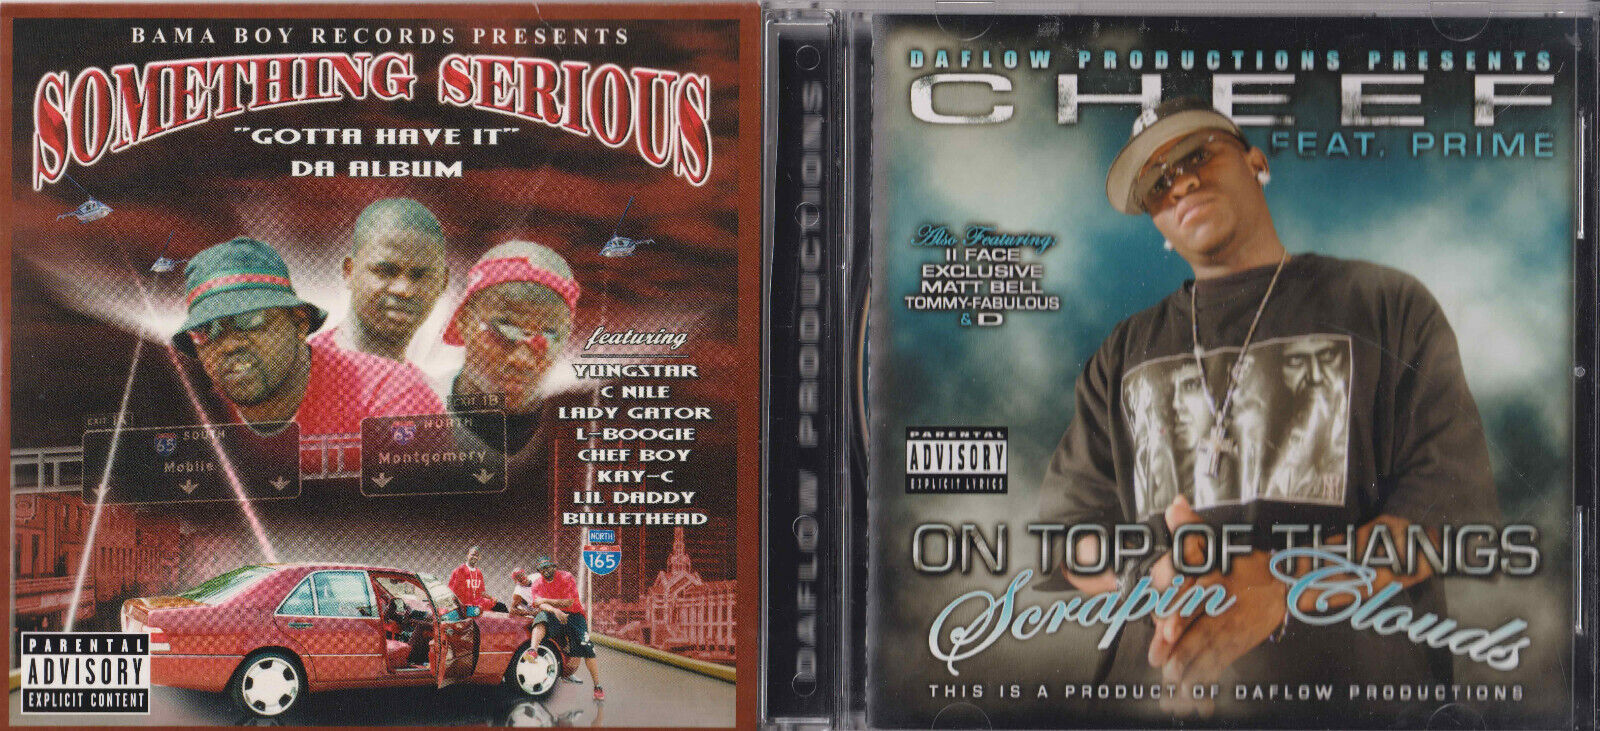 !@#$ Cheef - Top Of Thangs x Something Serious Have It Alabama Rap G-Funk !@#$